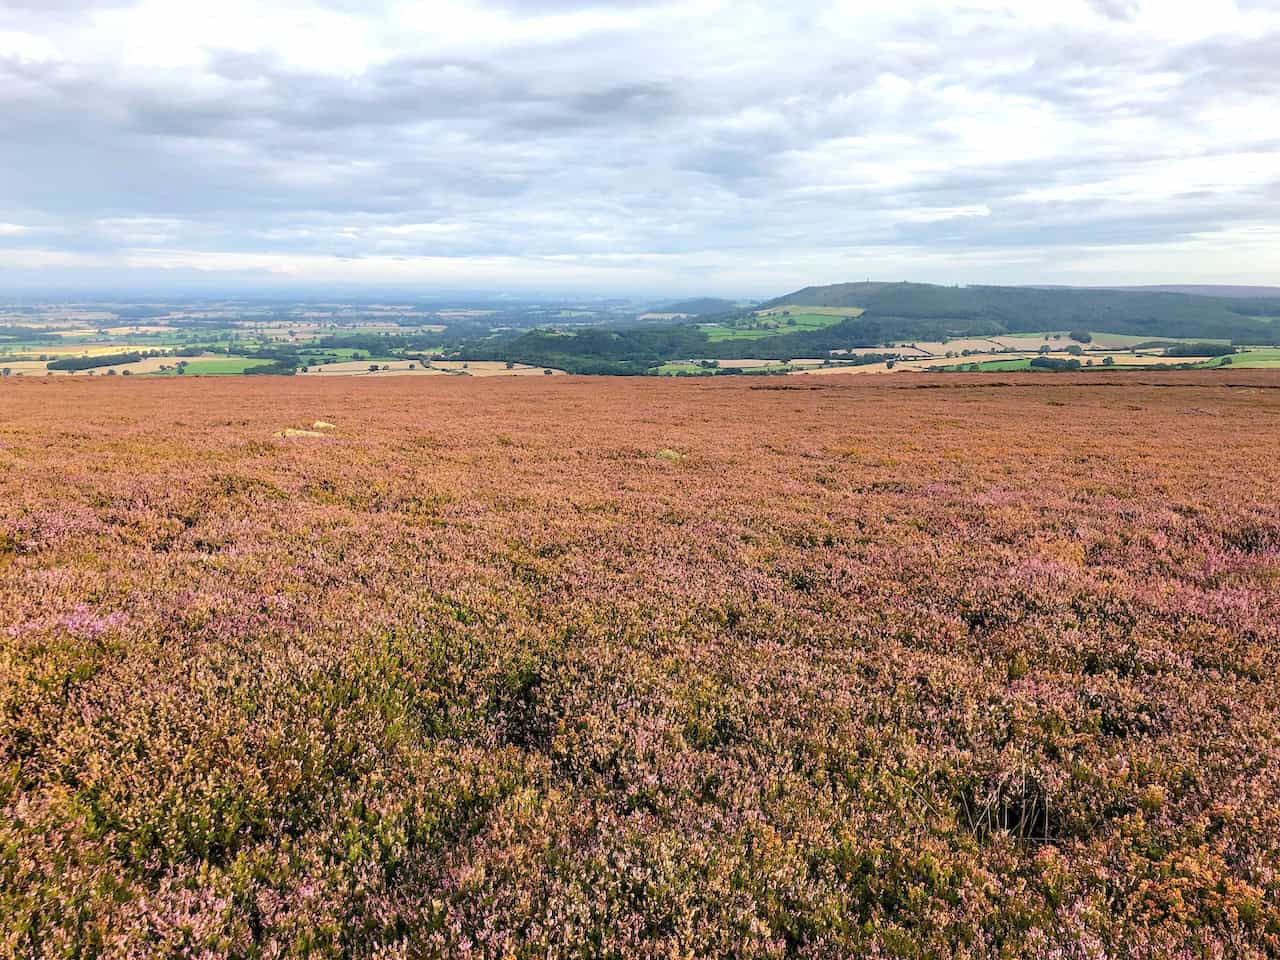 The view north-west from Battersby Moor towards Great Ayton and Teesside is a rewarding sight for walkers.